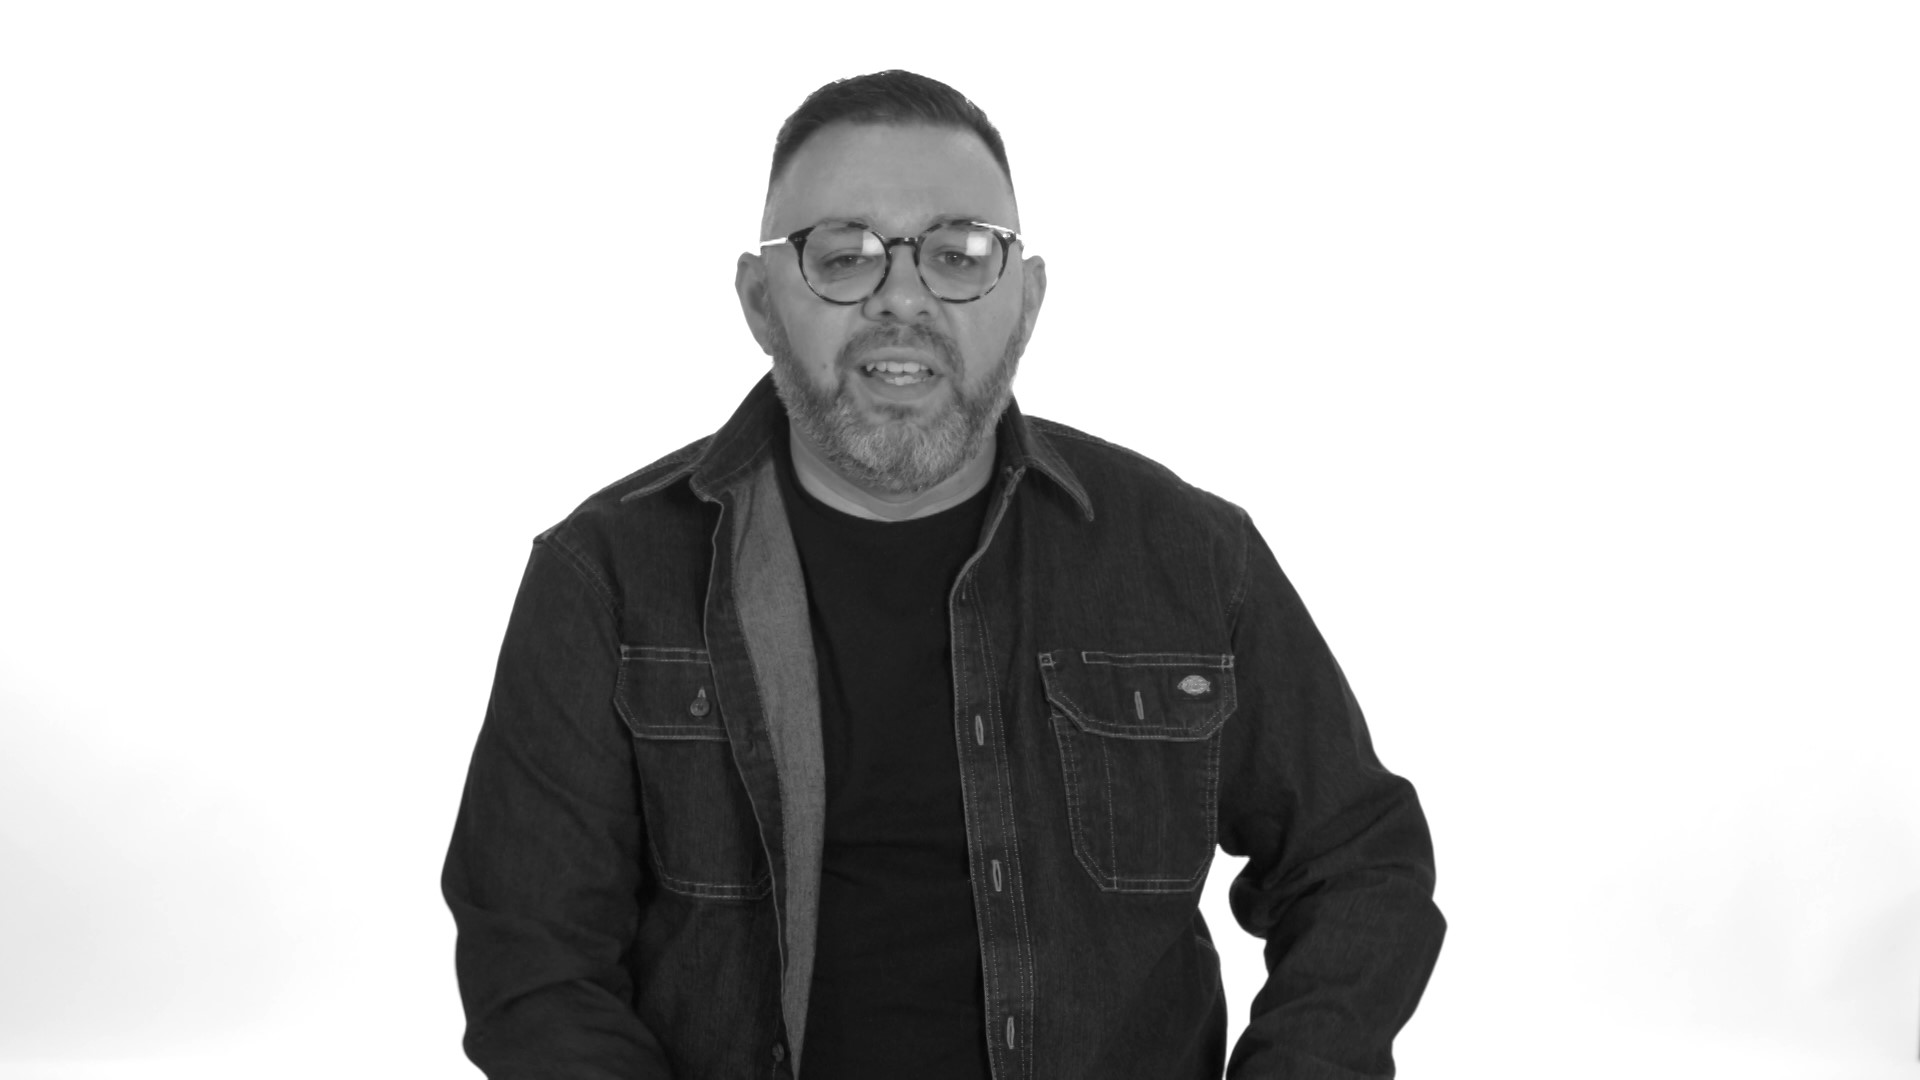 Let's Talk sits down with pastor and community activist Jose Ceniceros to talk about his experiences living in the Inland Northwest.